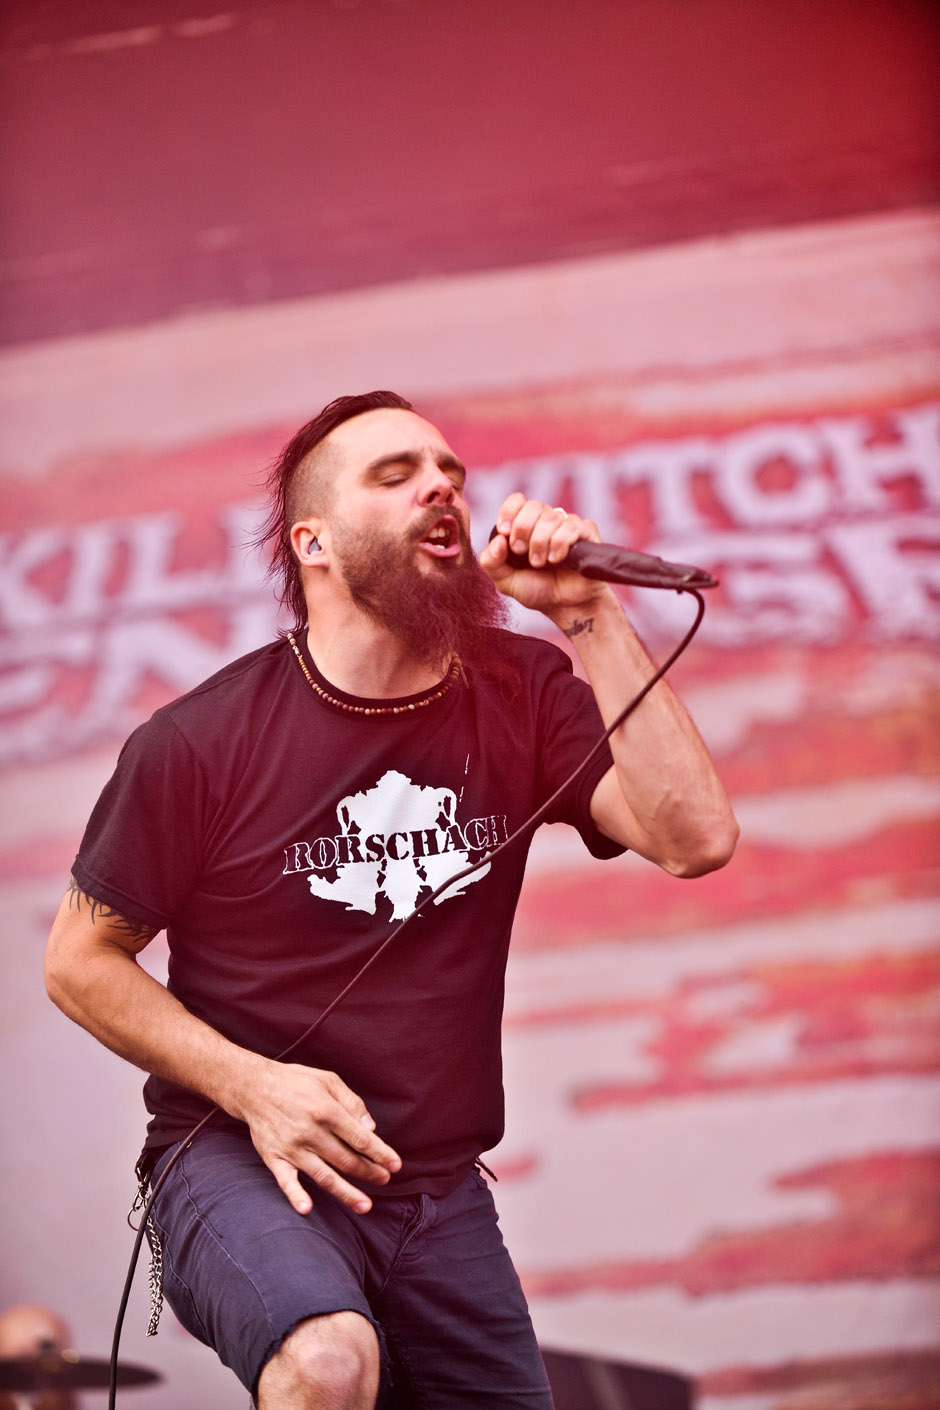 Killswitch Engage, Rock am Ring 2012